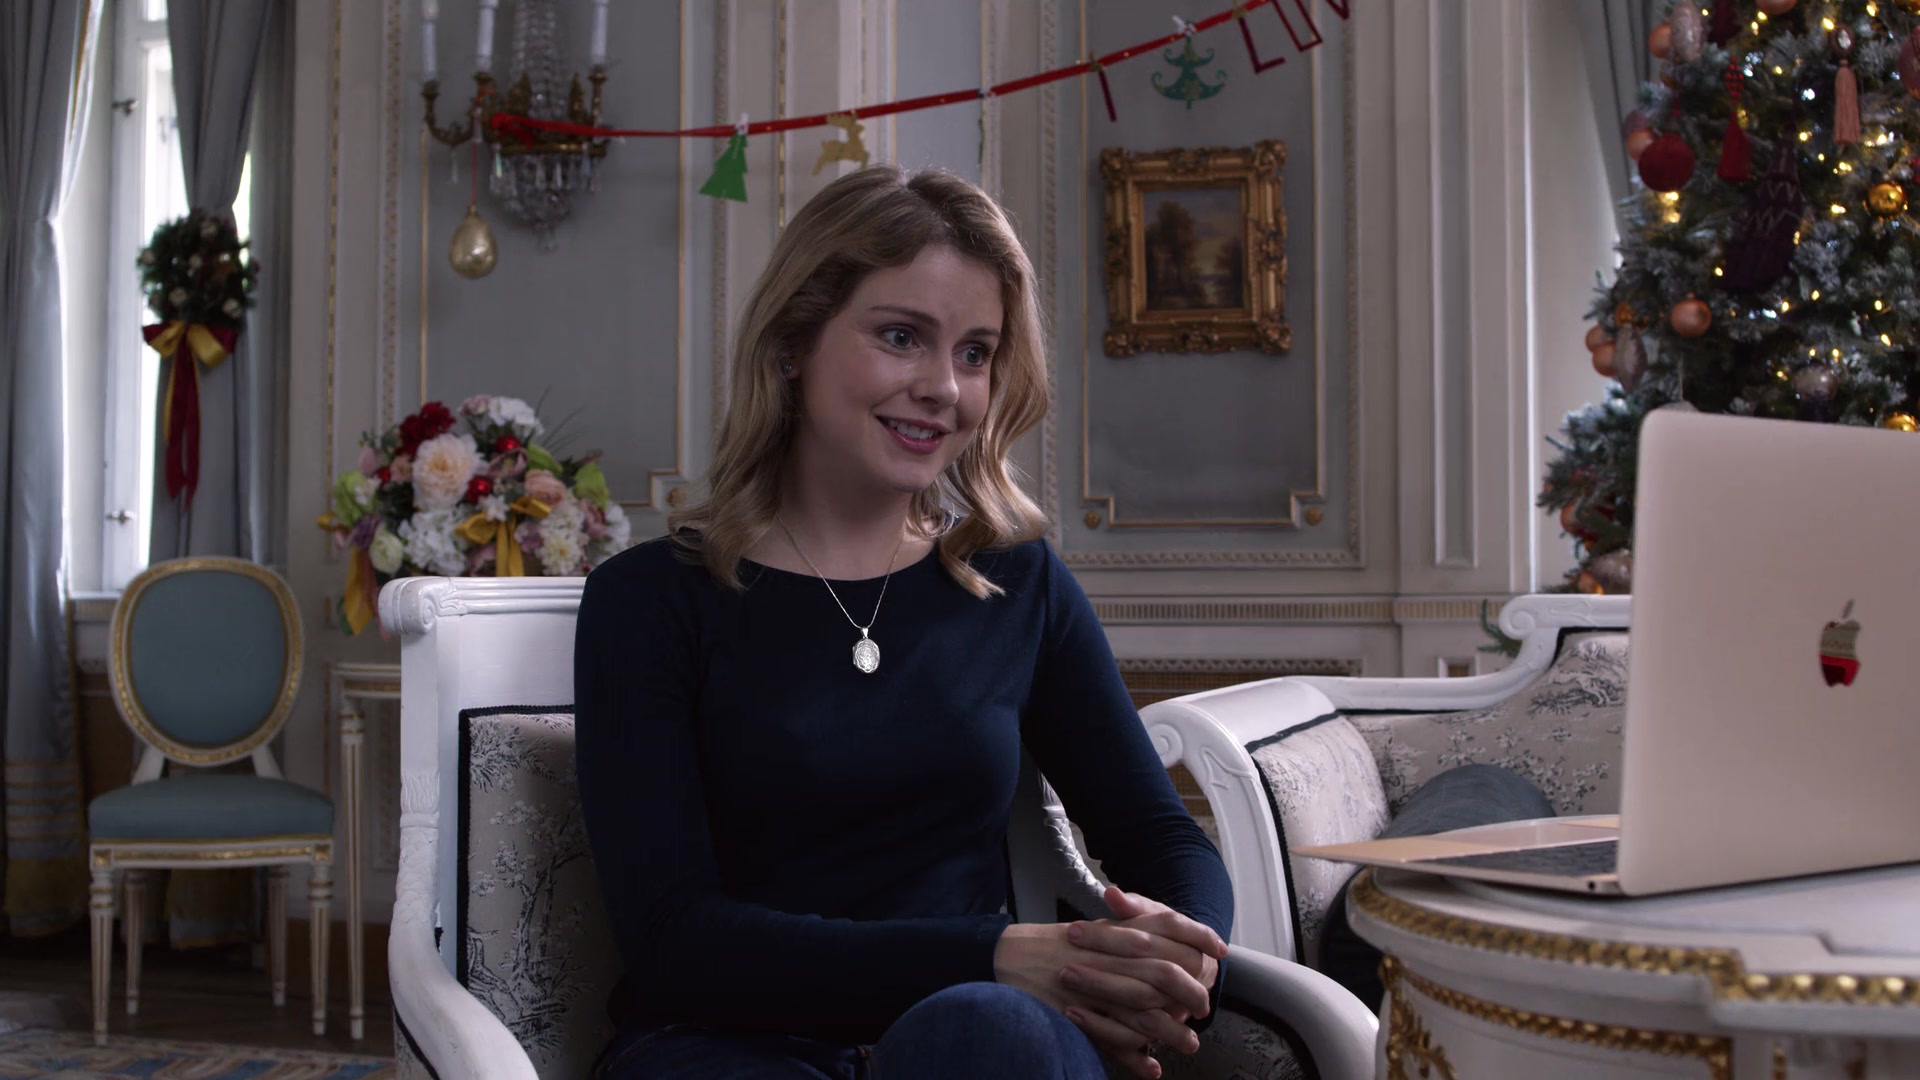 Apple MacBook Laptop Used by Rose McIver in A Christmas Prince: The Royal Wedding (2018)